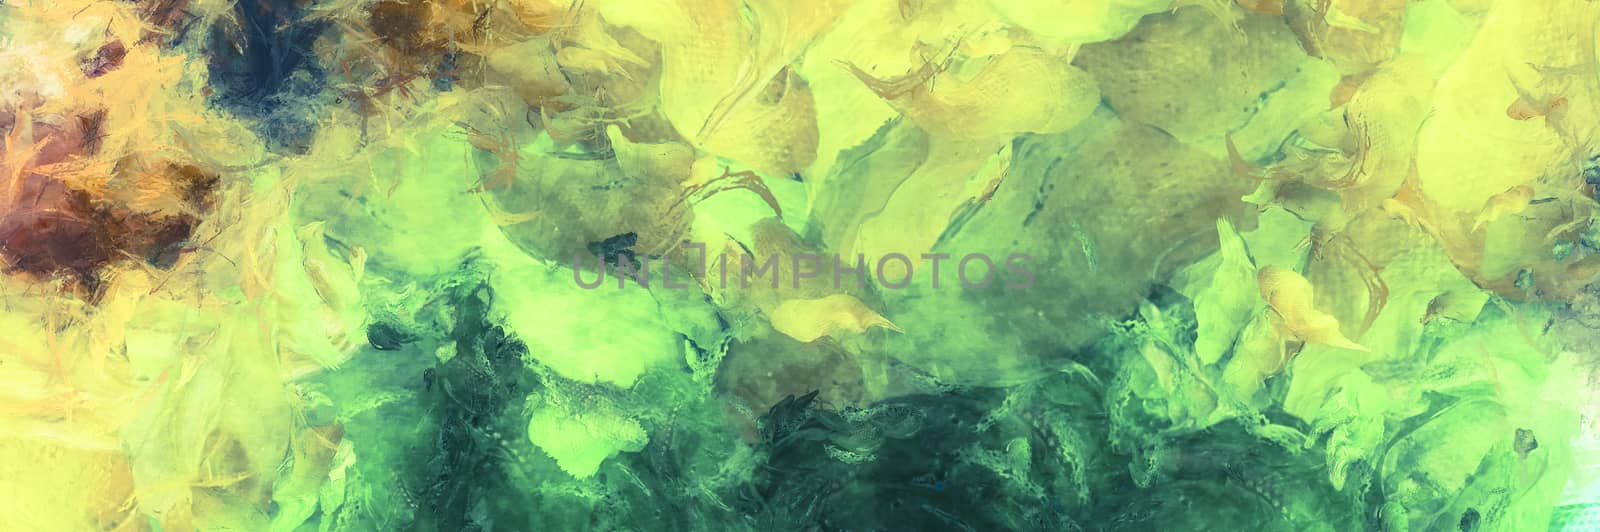 Emerald Abstract Painting by applesstock